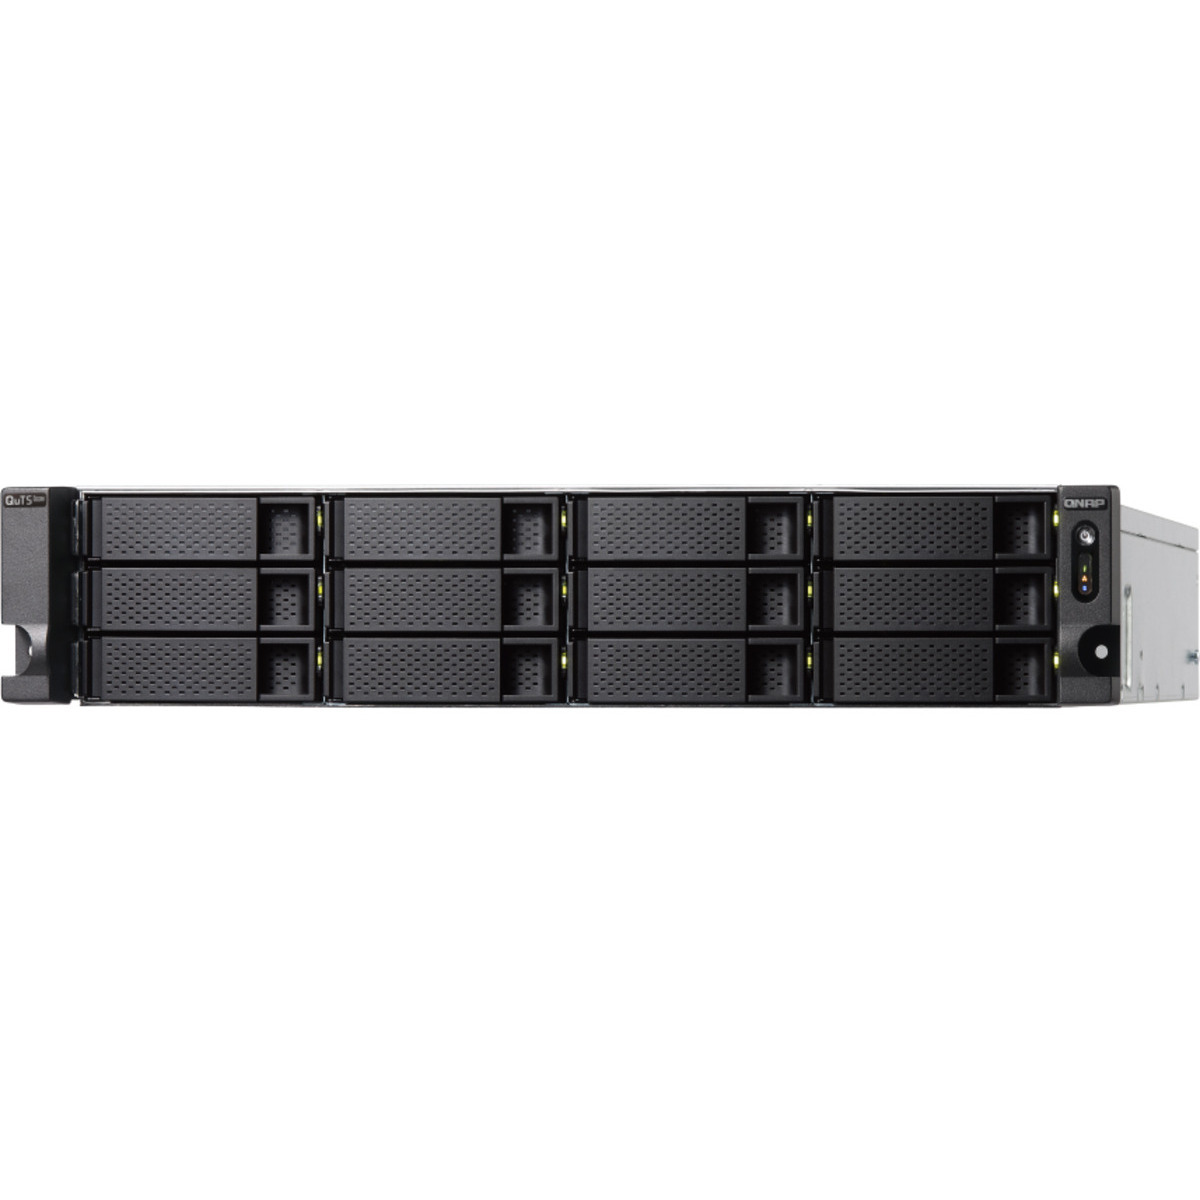 QNAP TS-h1886XU-RP NAS - Network Attached Storage Device Burn-In Tested Configurations